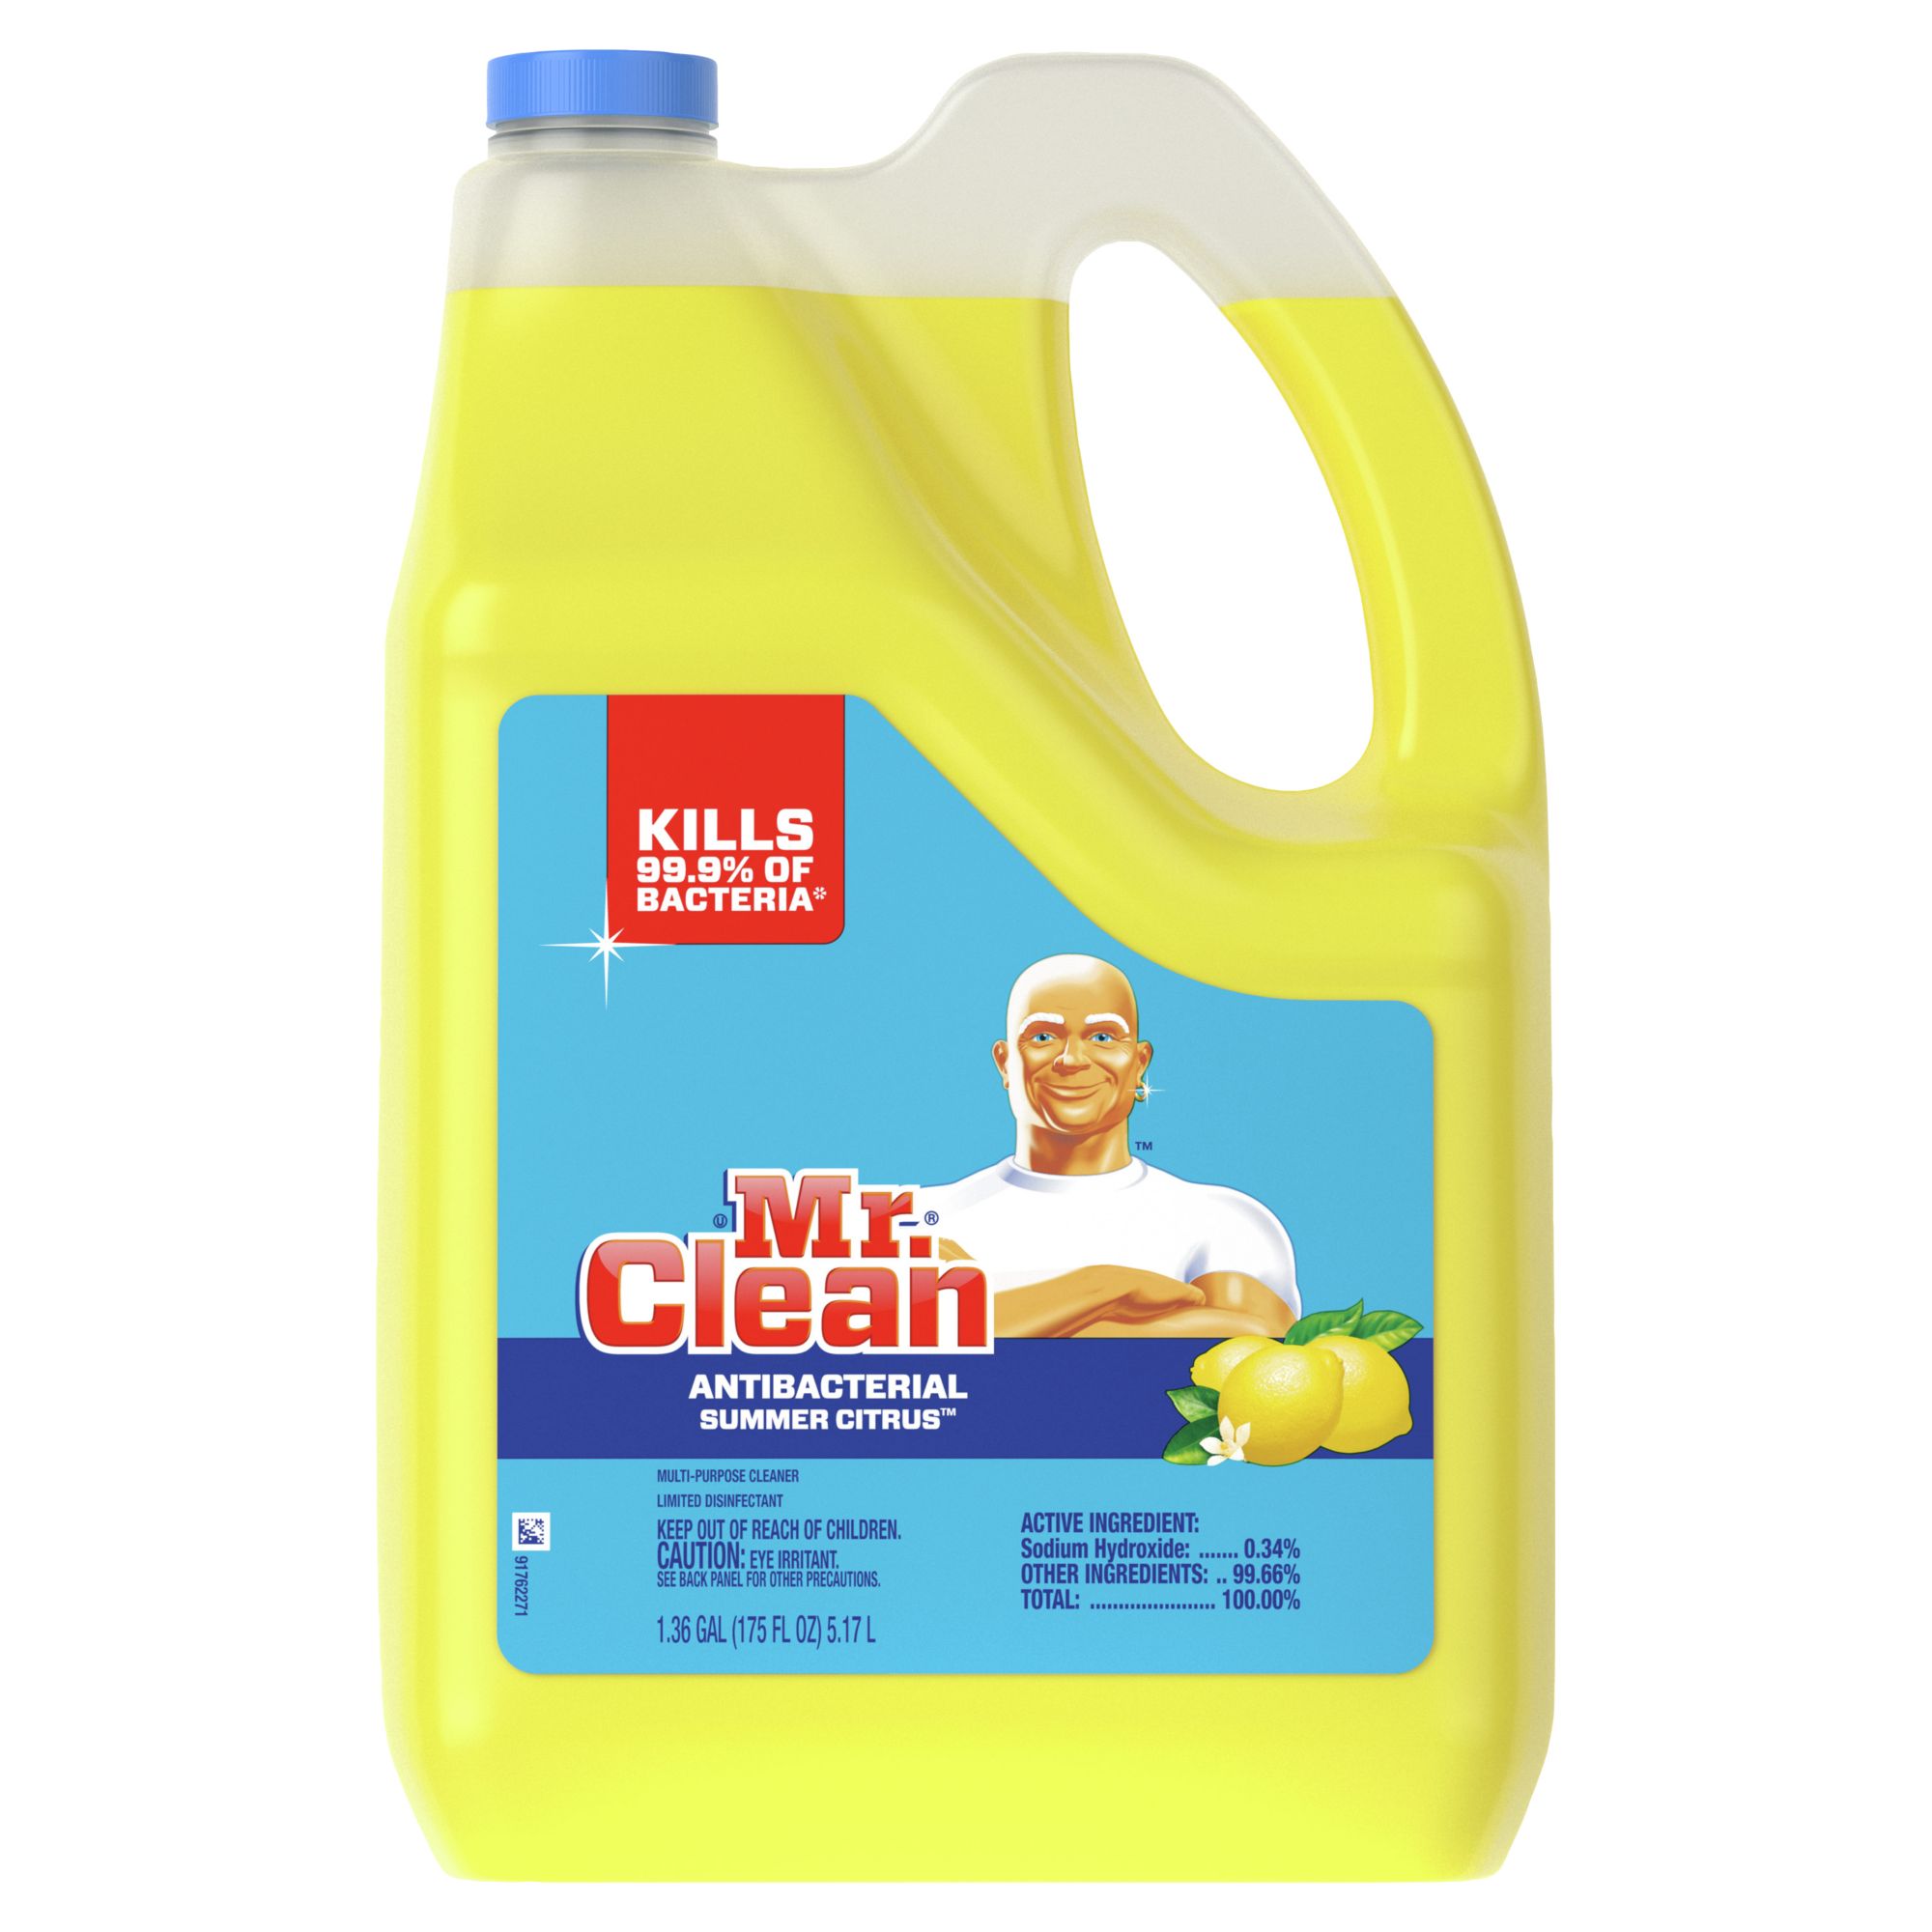 Soft Scrub 36-oz Bleach Disinfectant Liquid All-Purpose Cleaner in the  All-Purpose Cleaners department at